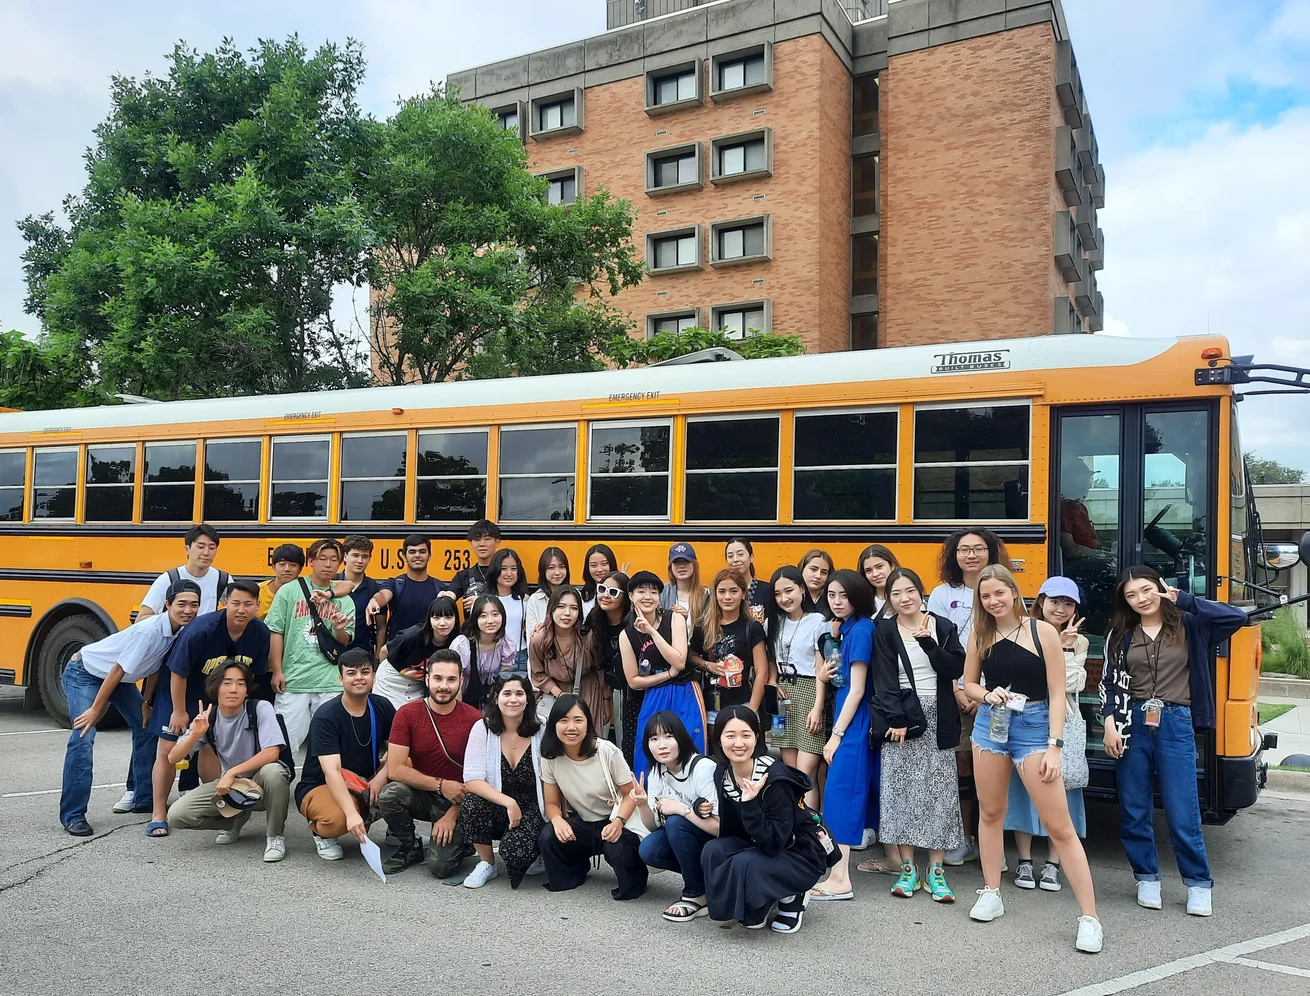 Summer Institute students pose for photo in front of a yellow school bus before heading out on a field trip